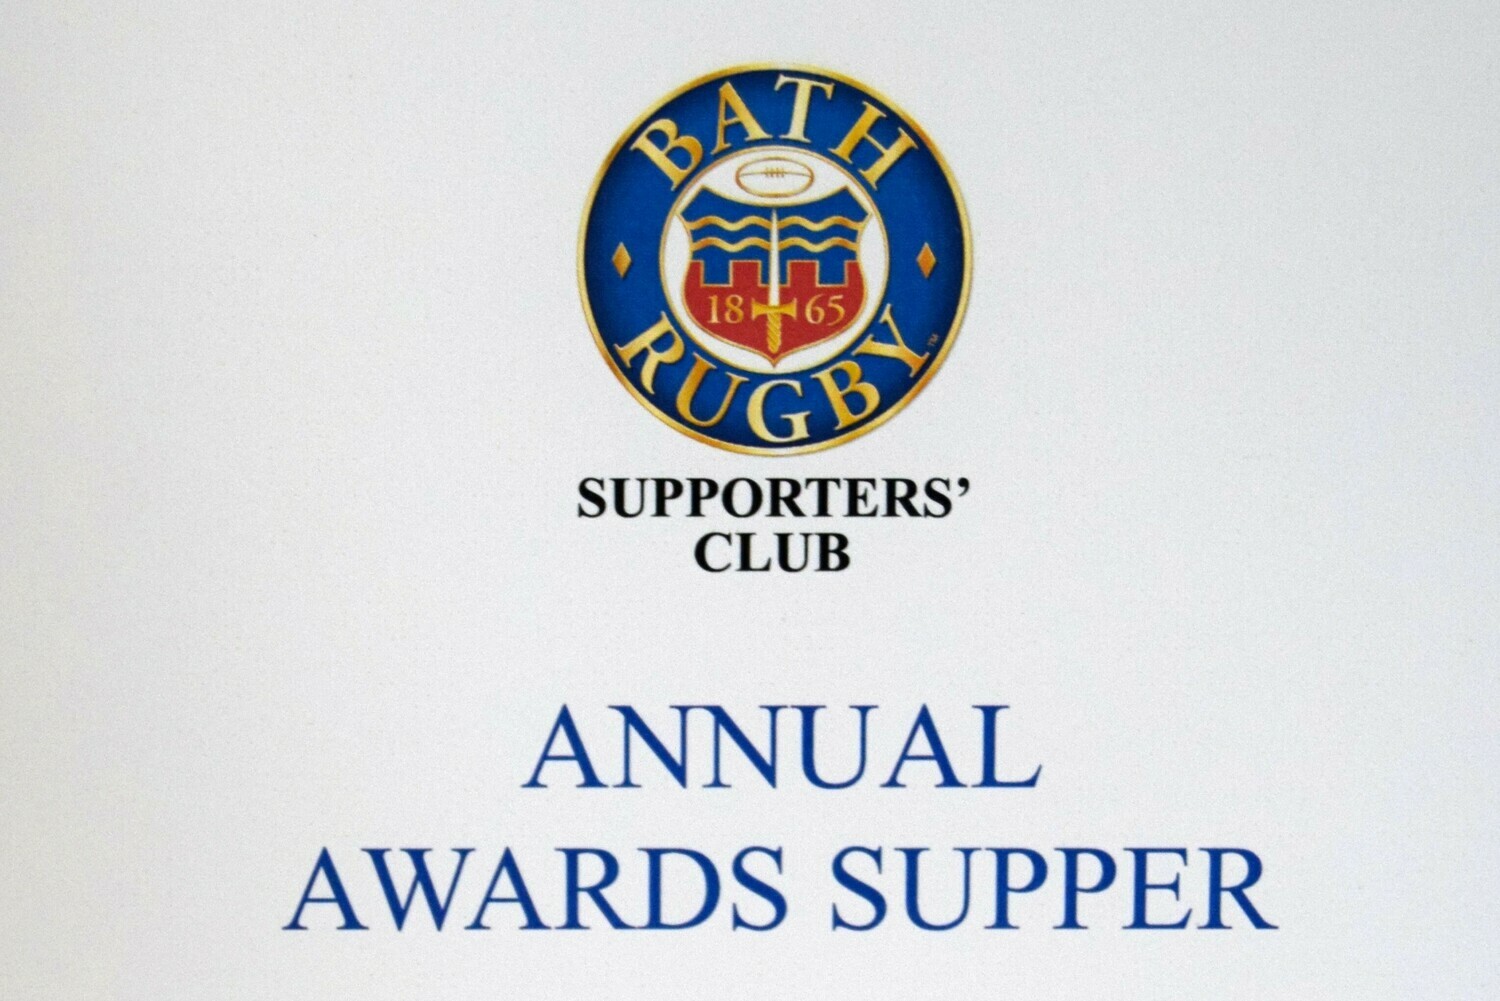 Annual Awards Supper 2019 - Priority Booking Window for BRSC Members